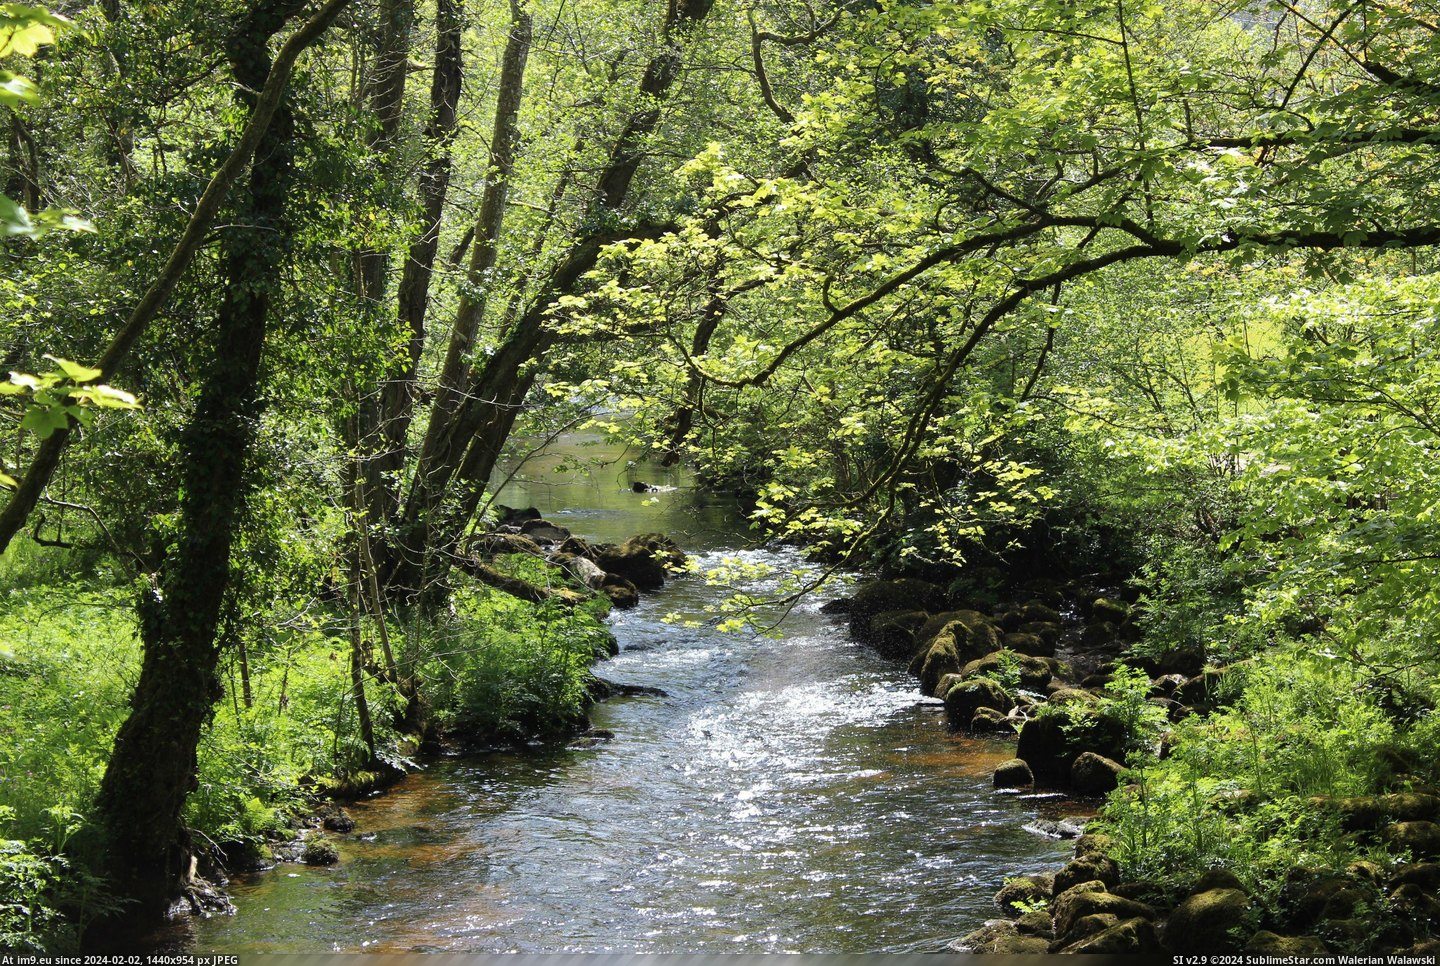 #River #England #5184x3456 #Forest [Earthporn] A secluded forest river - Dartmoor, England [5184x3456] Pic. (Obraz z album My r/EARTHPORN favs))